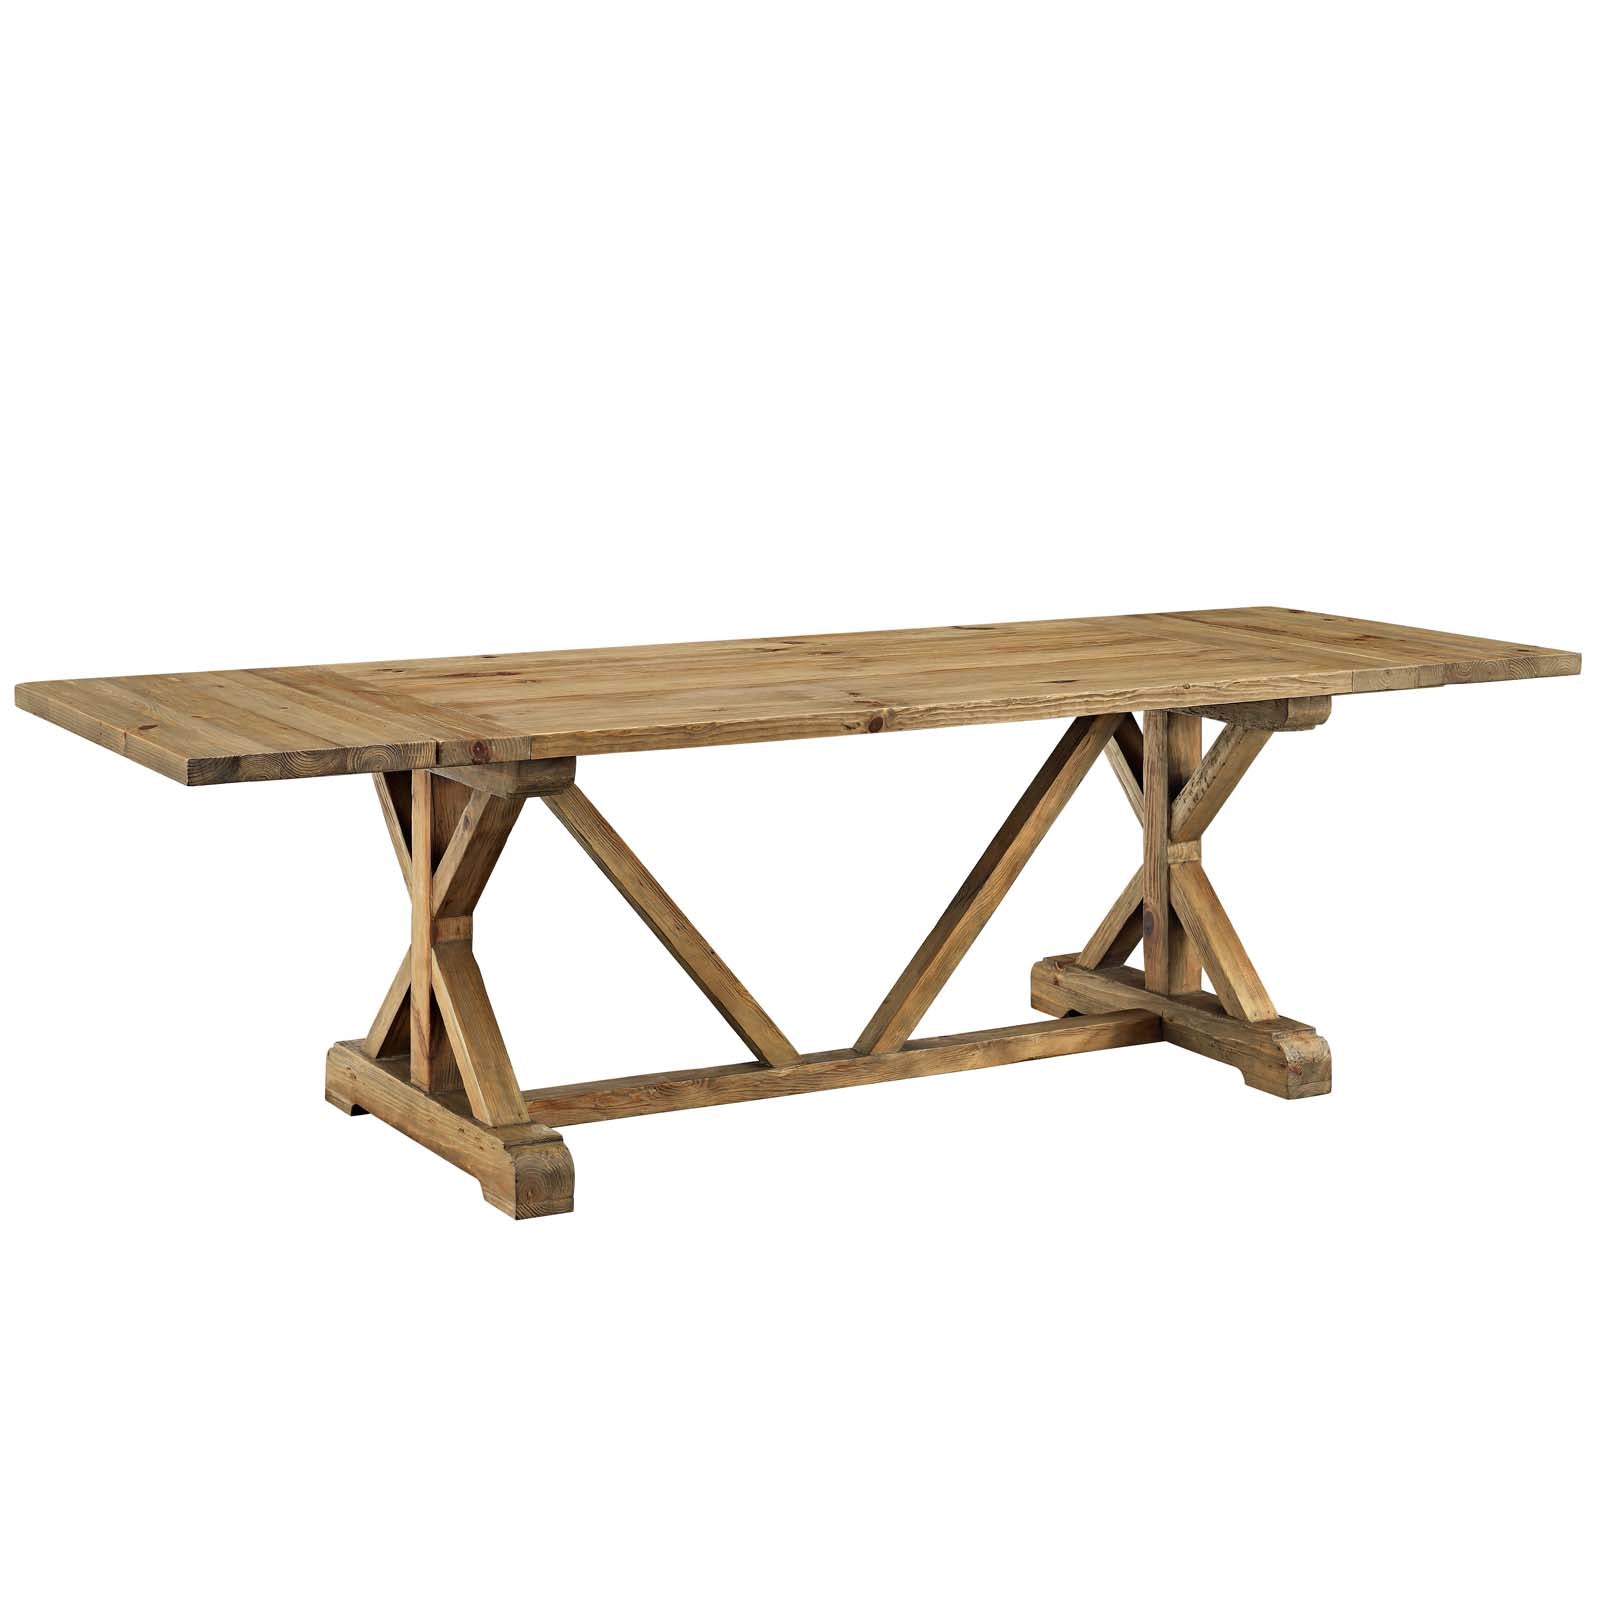 Den Extendable Wood Dining Table - East Shore Modern Home Furnishings